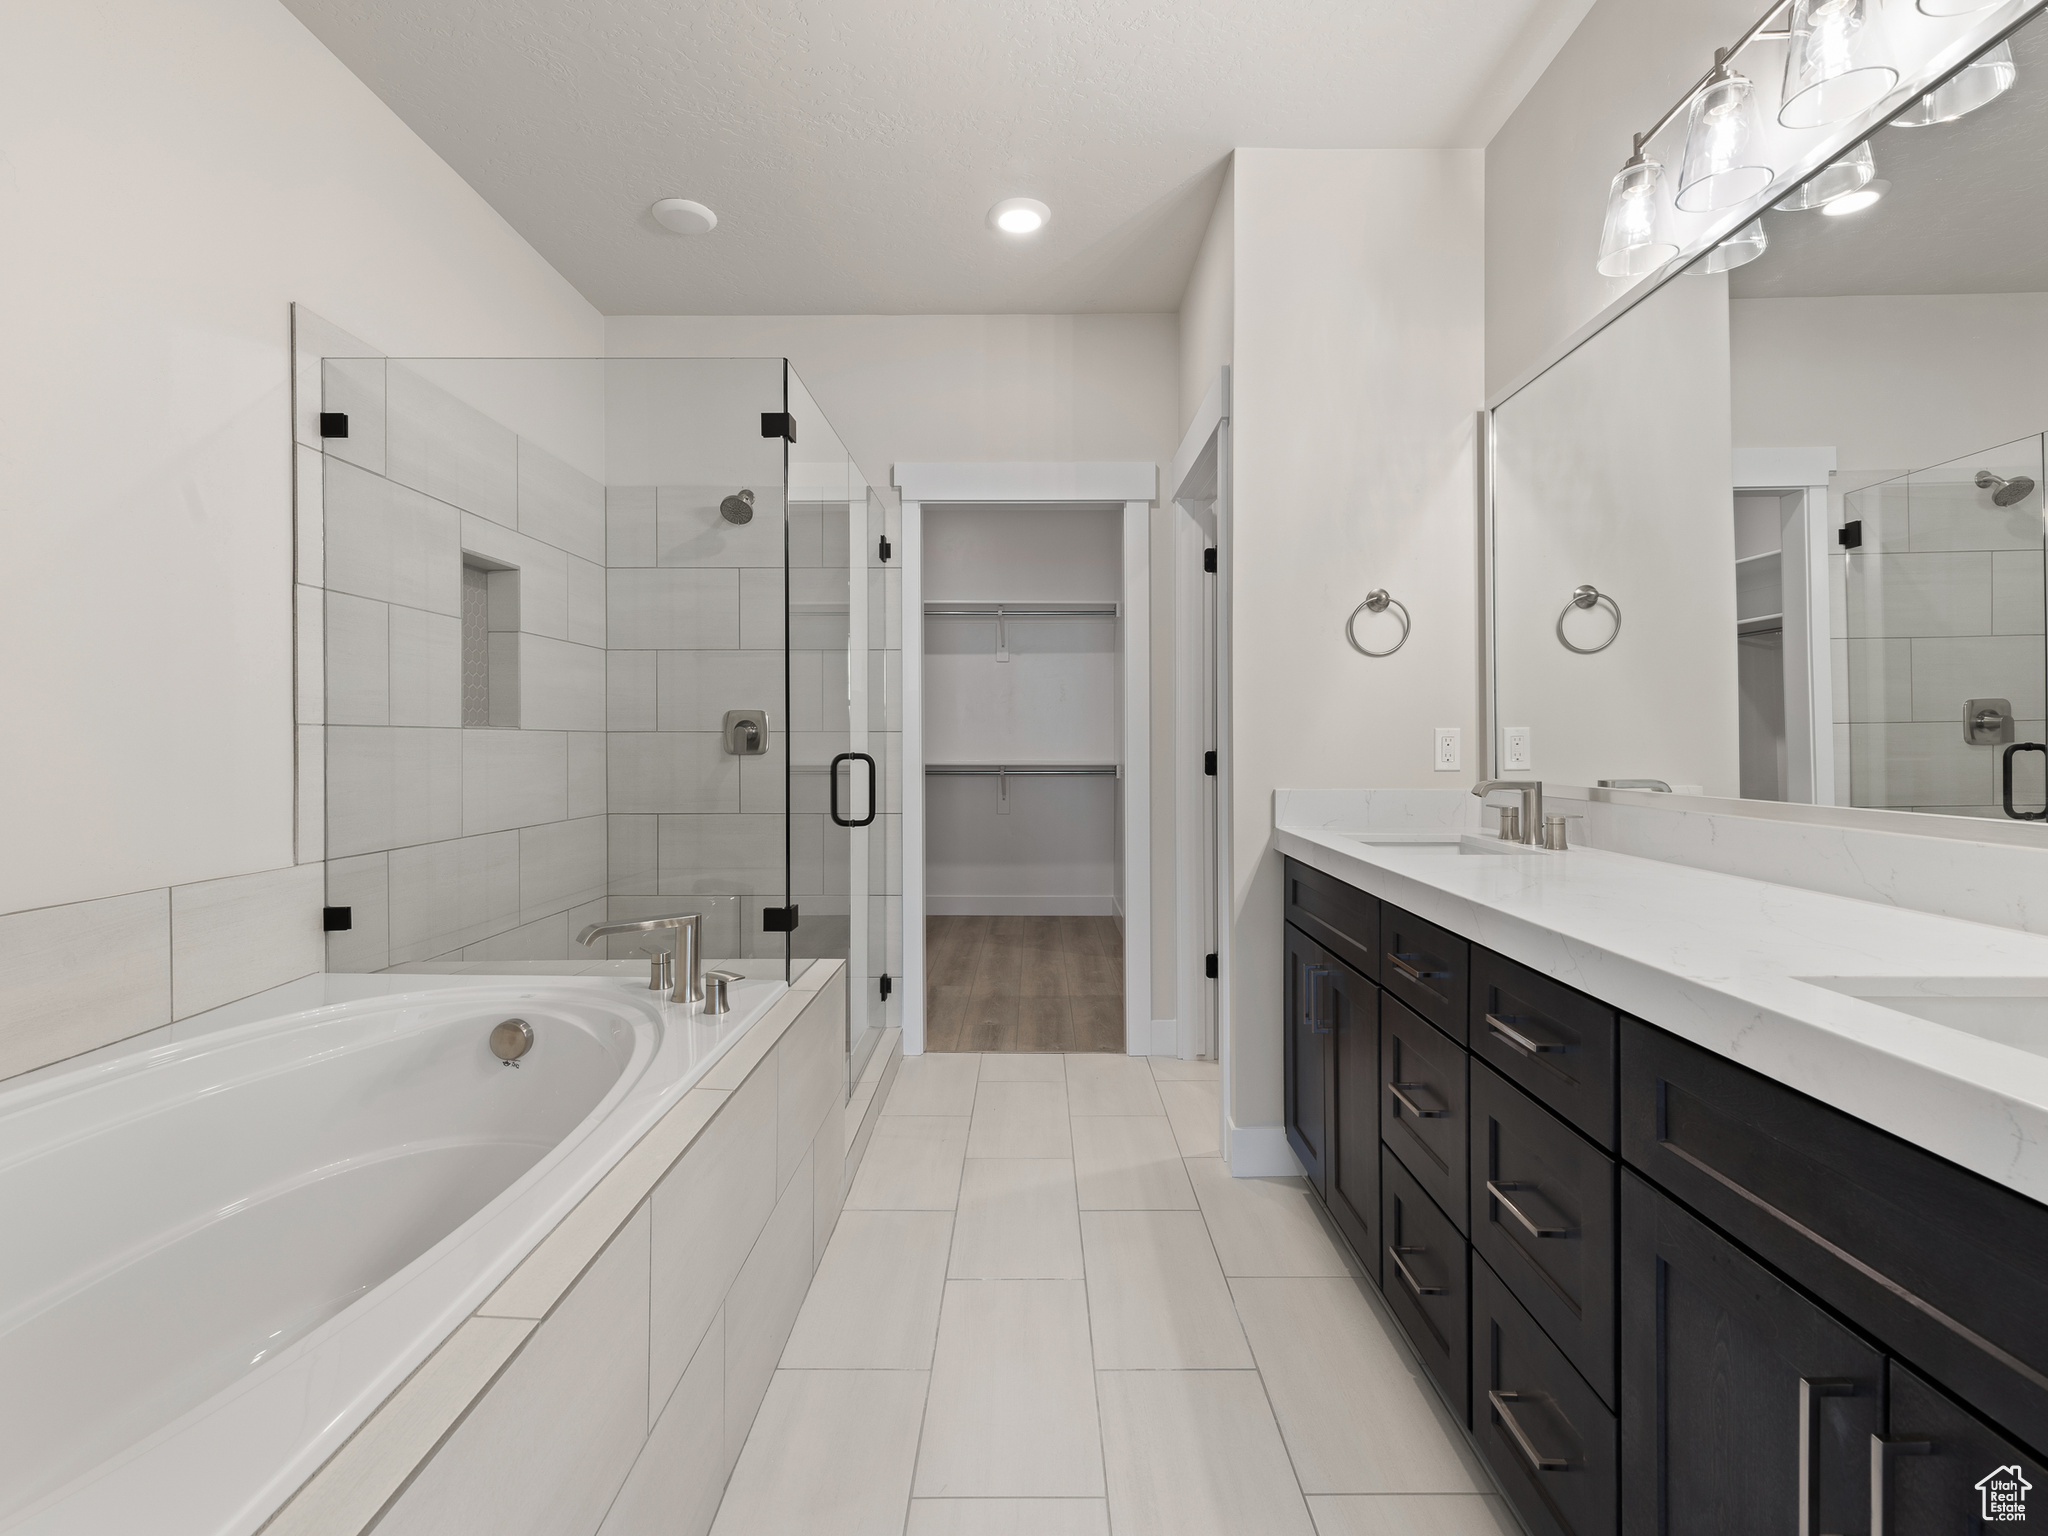 Owner's suite bathroom with large soaking tub and euroglass shower